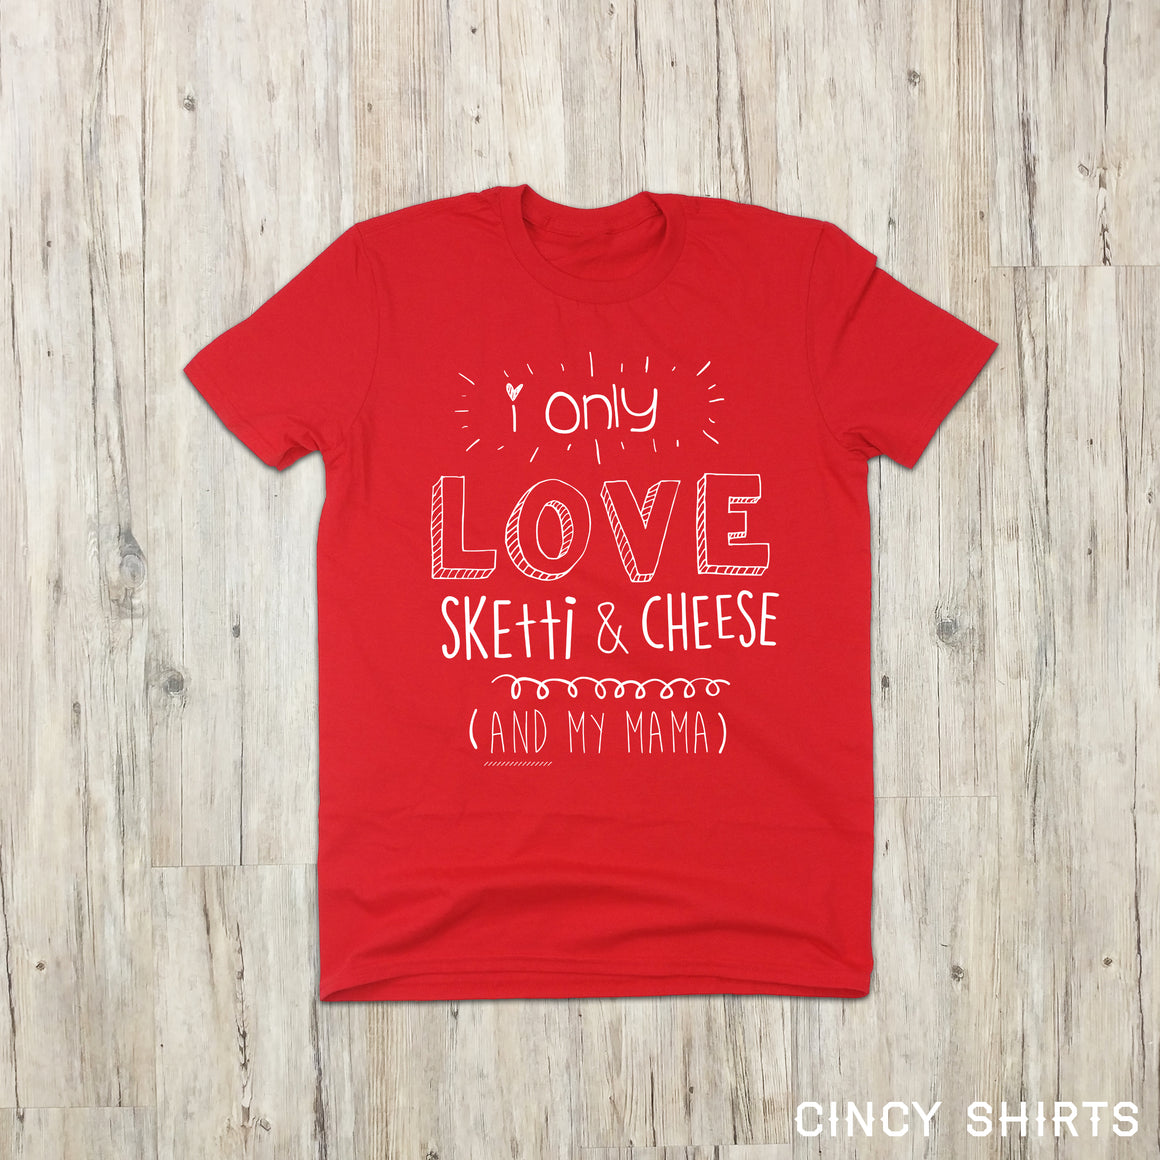 I Only Love Sketti & Cheese (And My Mama) - Cincy Shirts